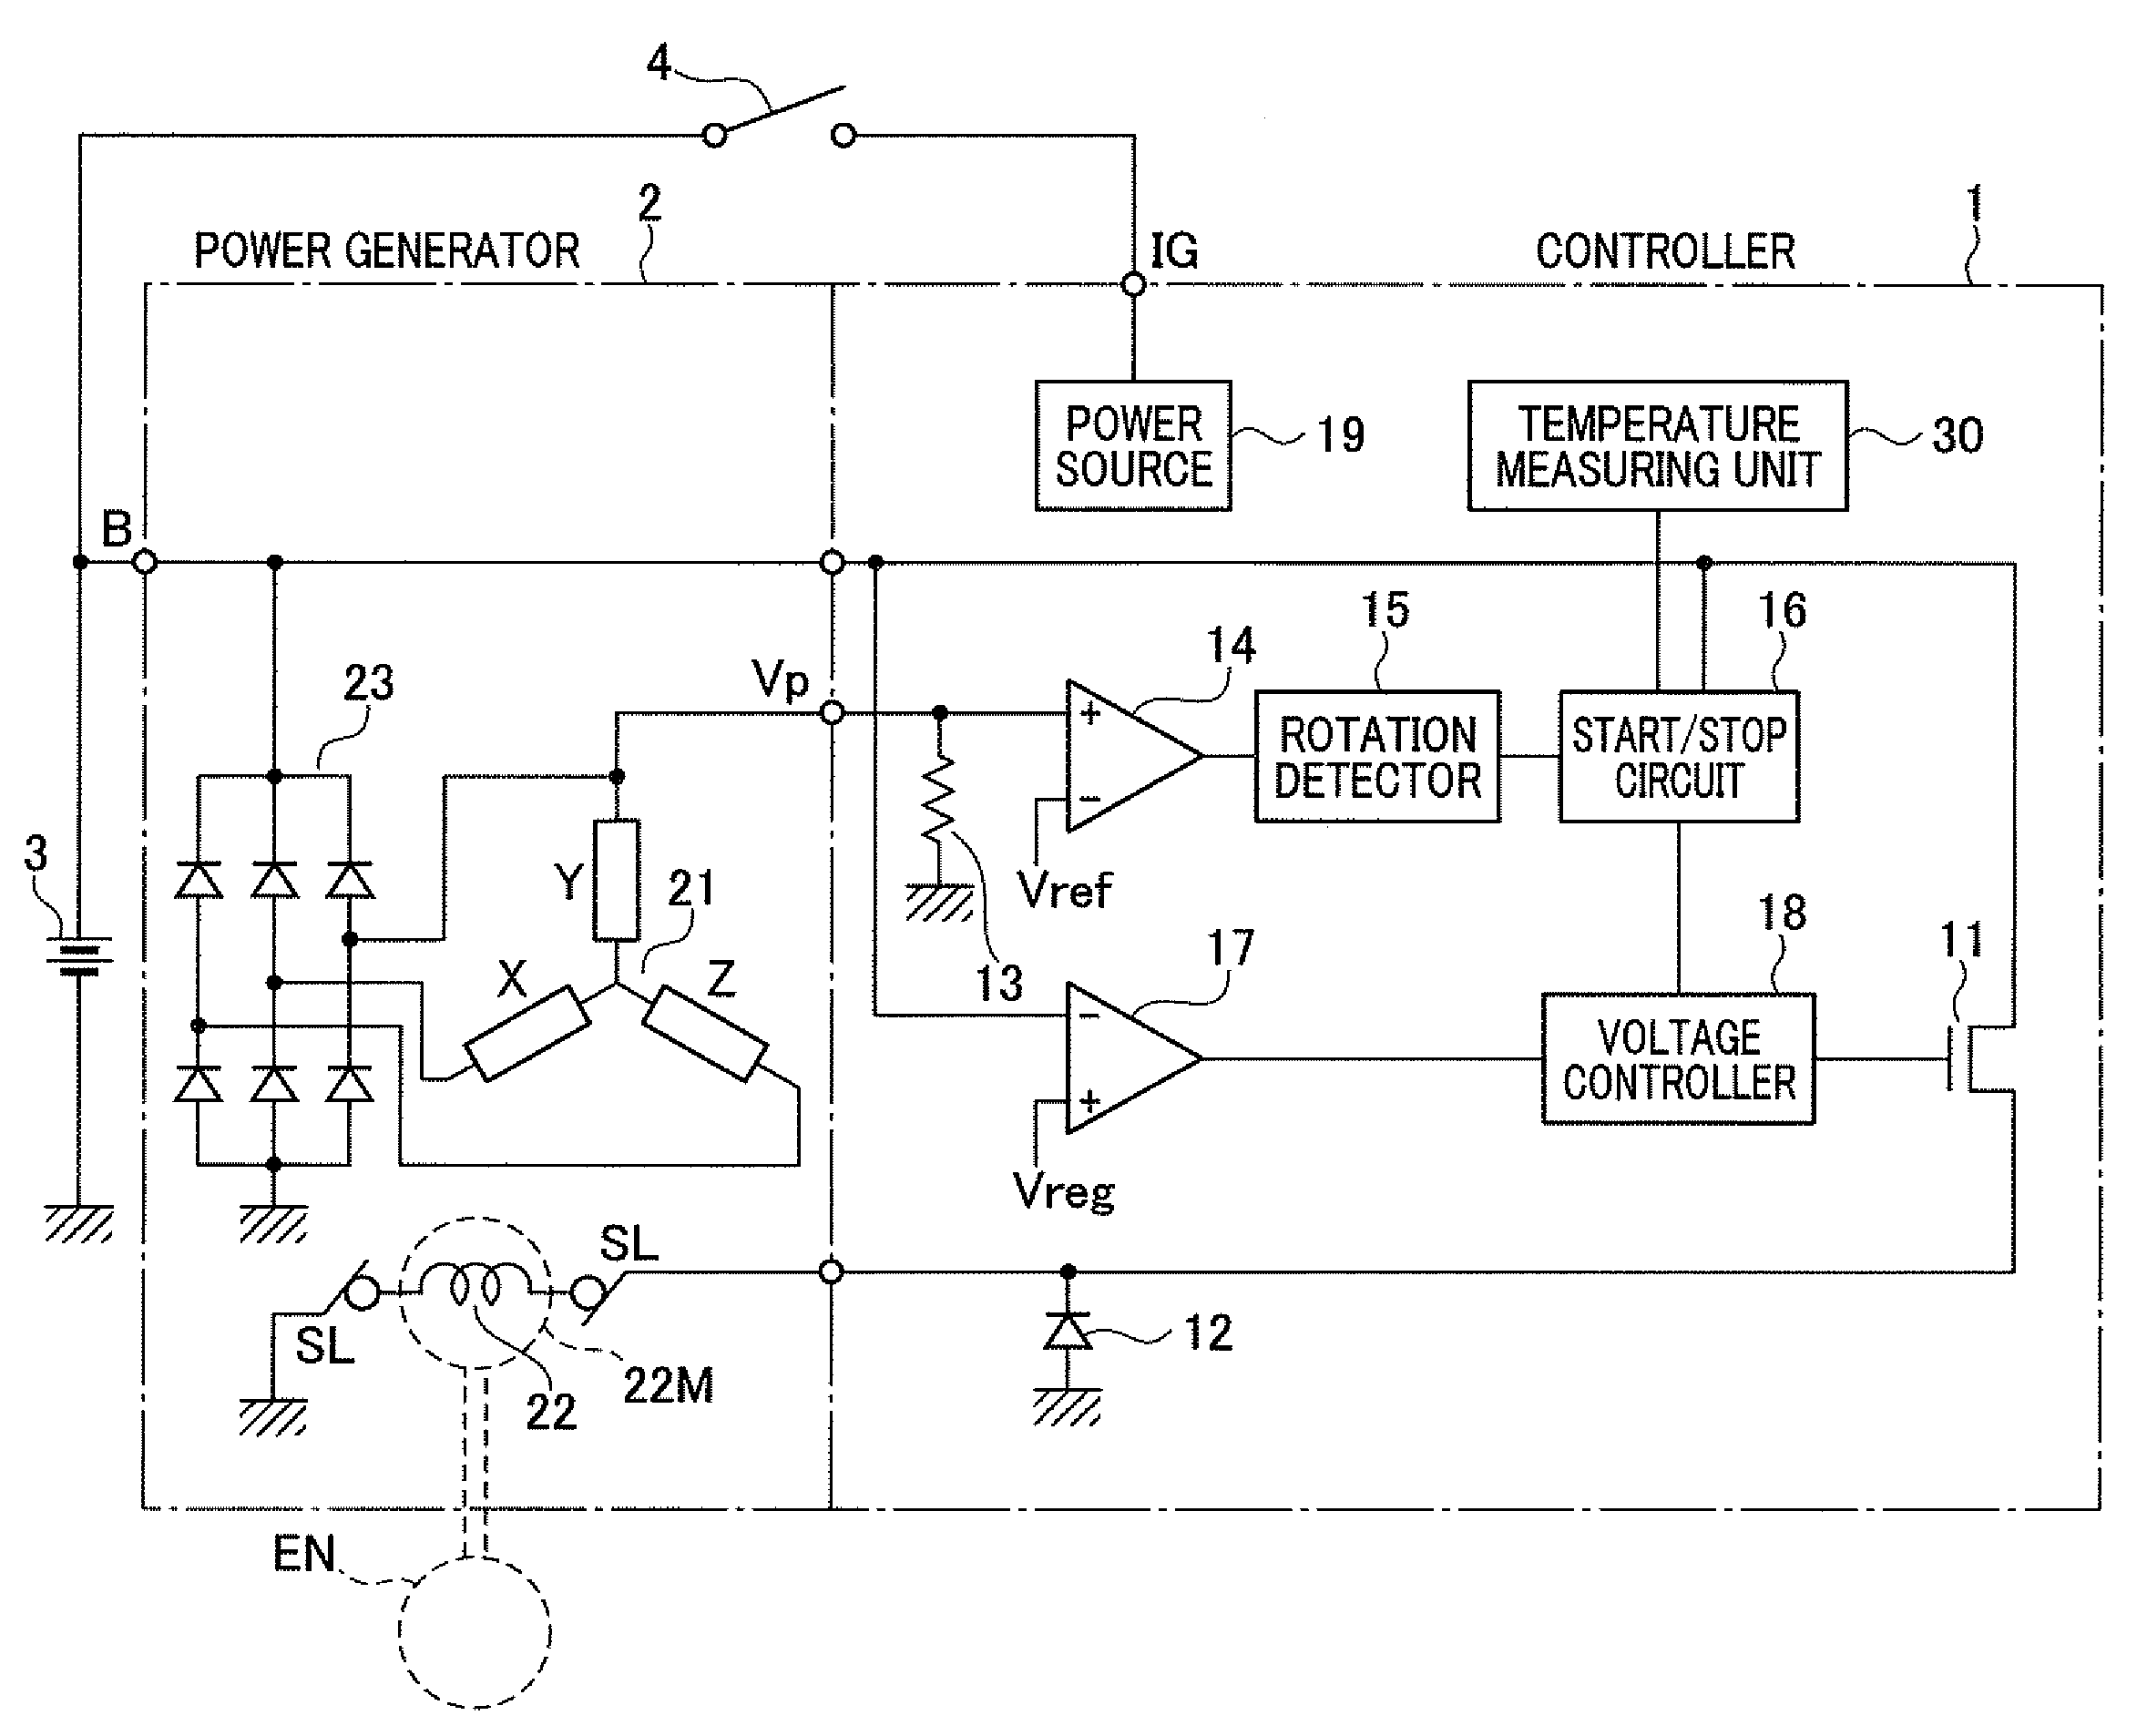 Controller for controlling power generator driven by rotational power of engine